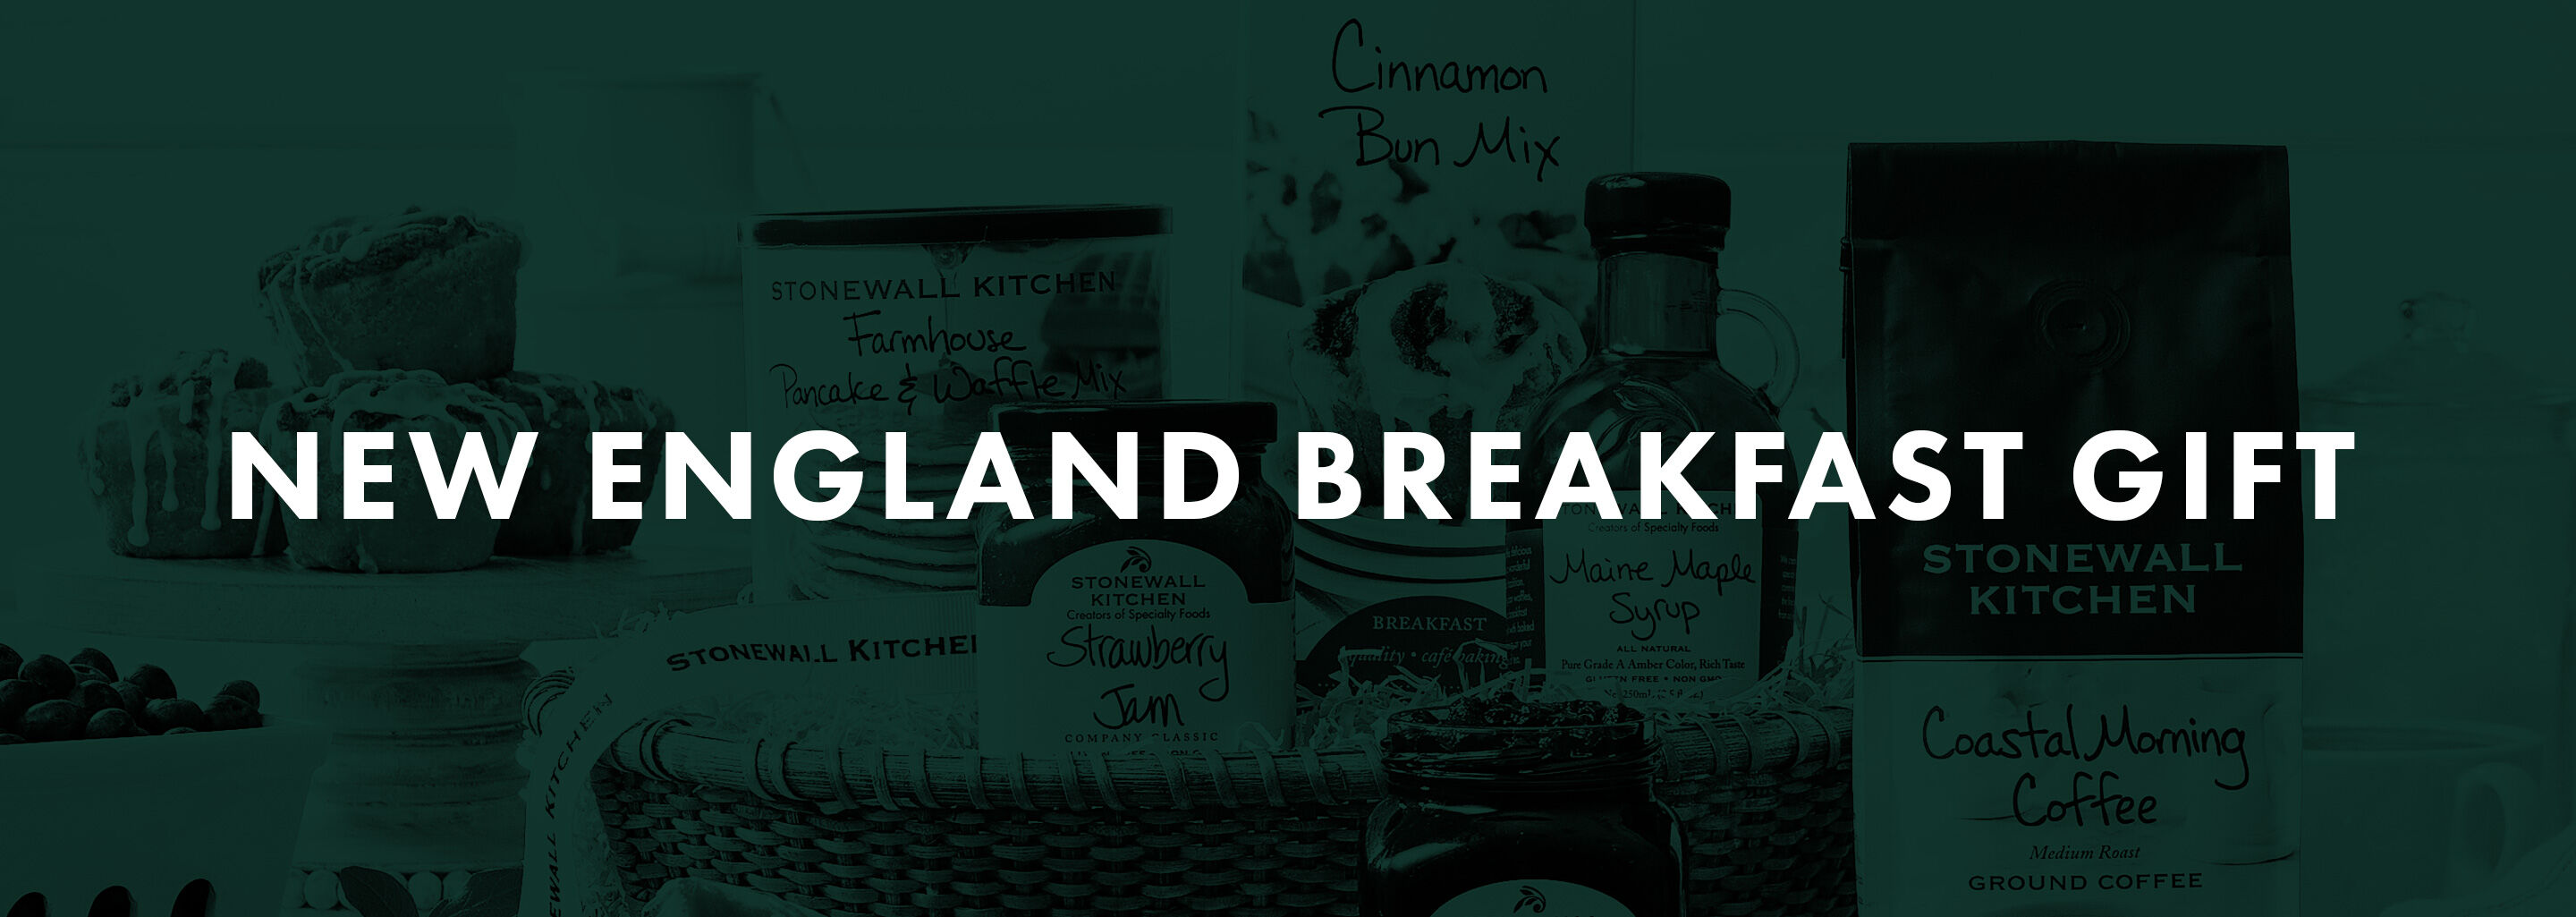 New England Breakfast Gift by Stonewall Kitchen